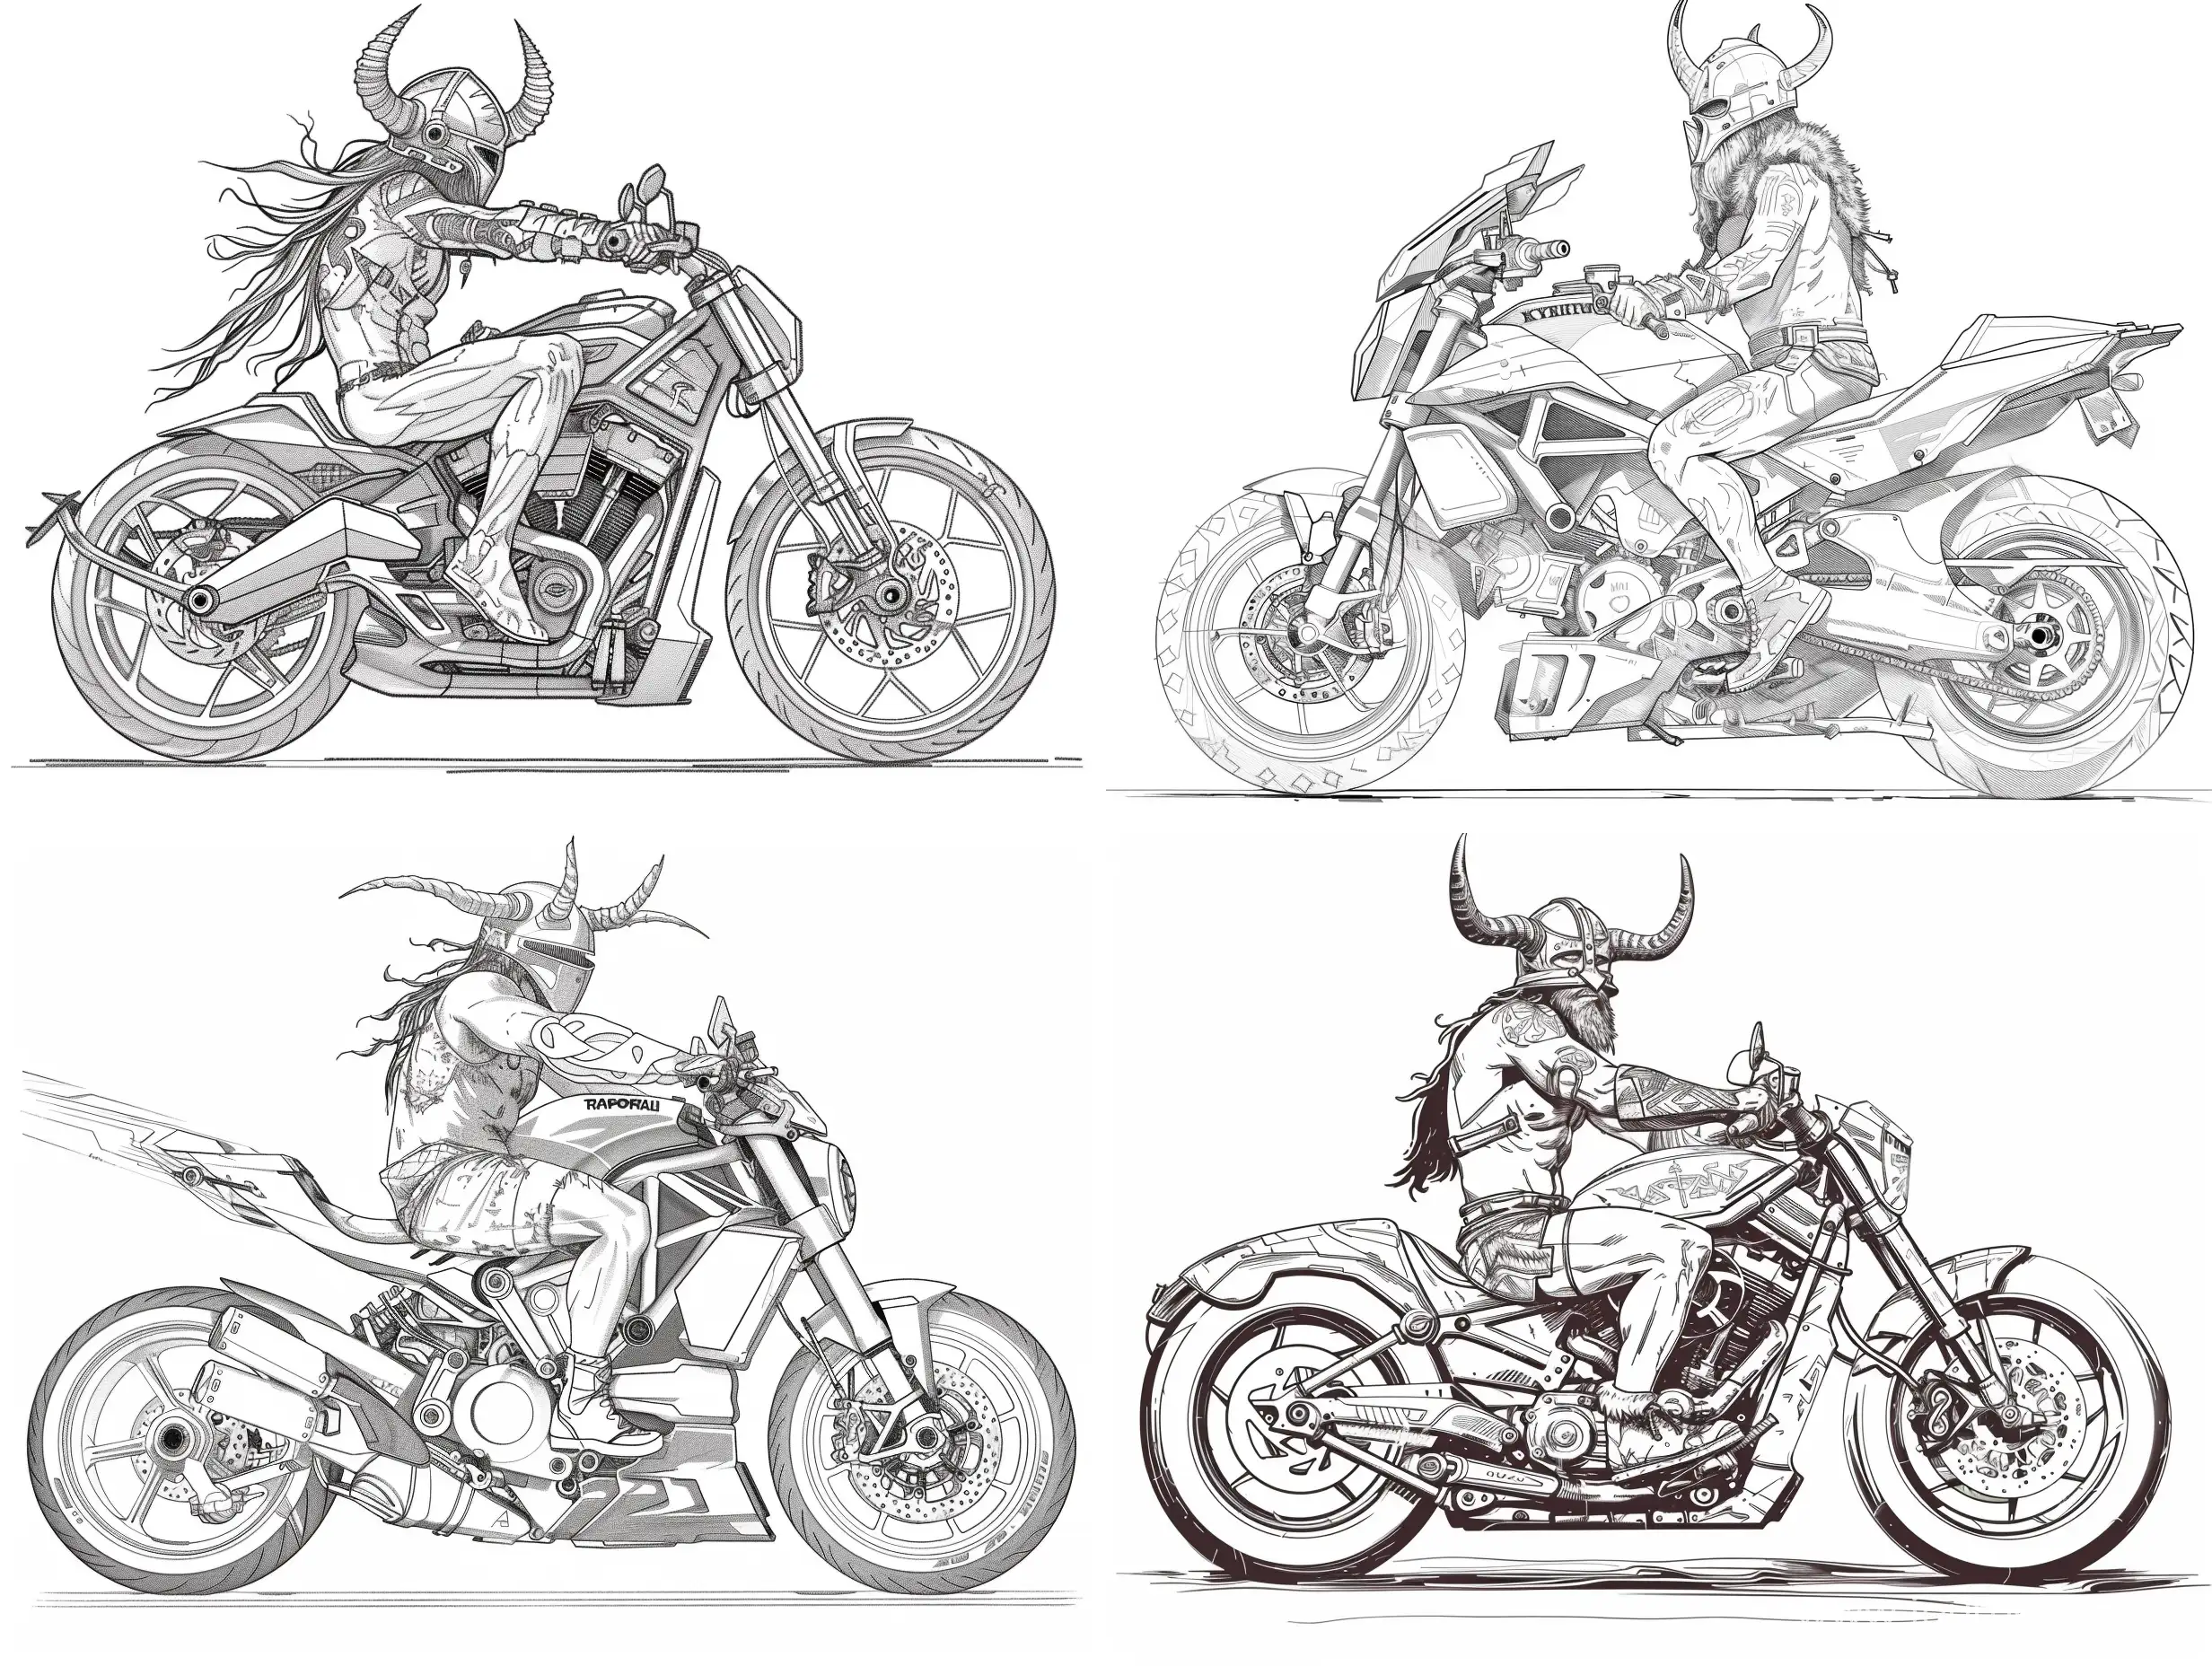 Futuristic-Viking-Riding-Motorcycle-with-Horned-Helmet-Black-and-White-Illustration